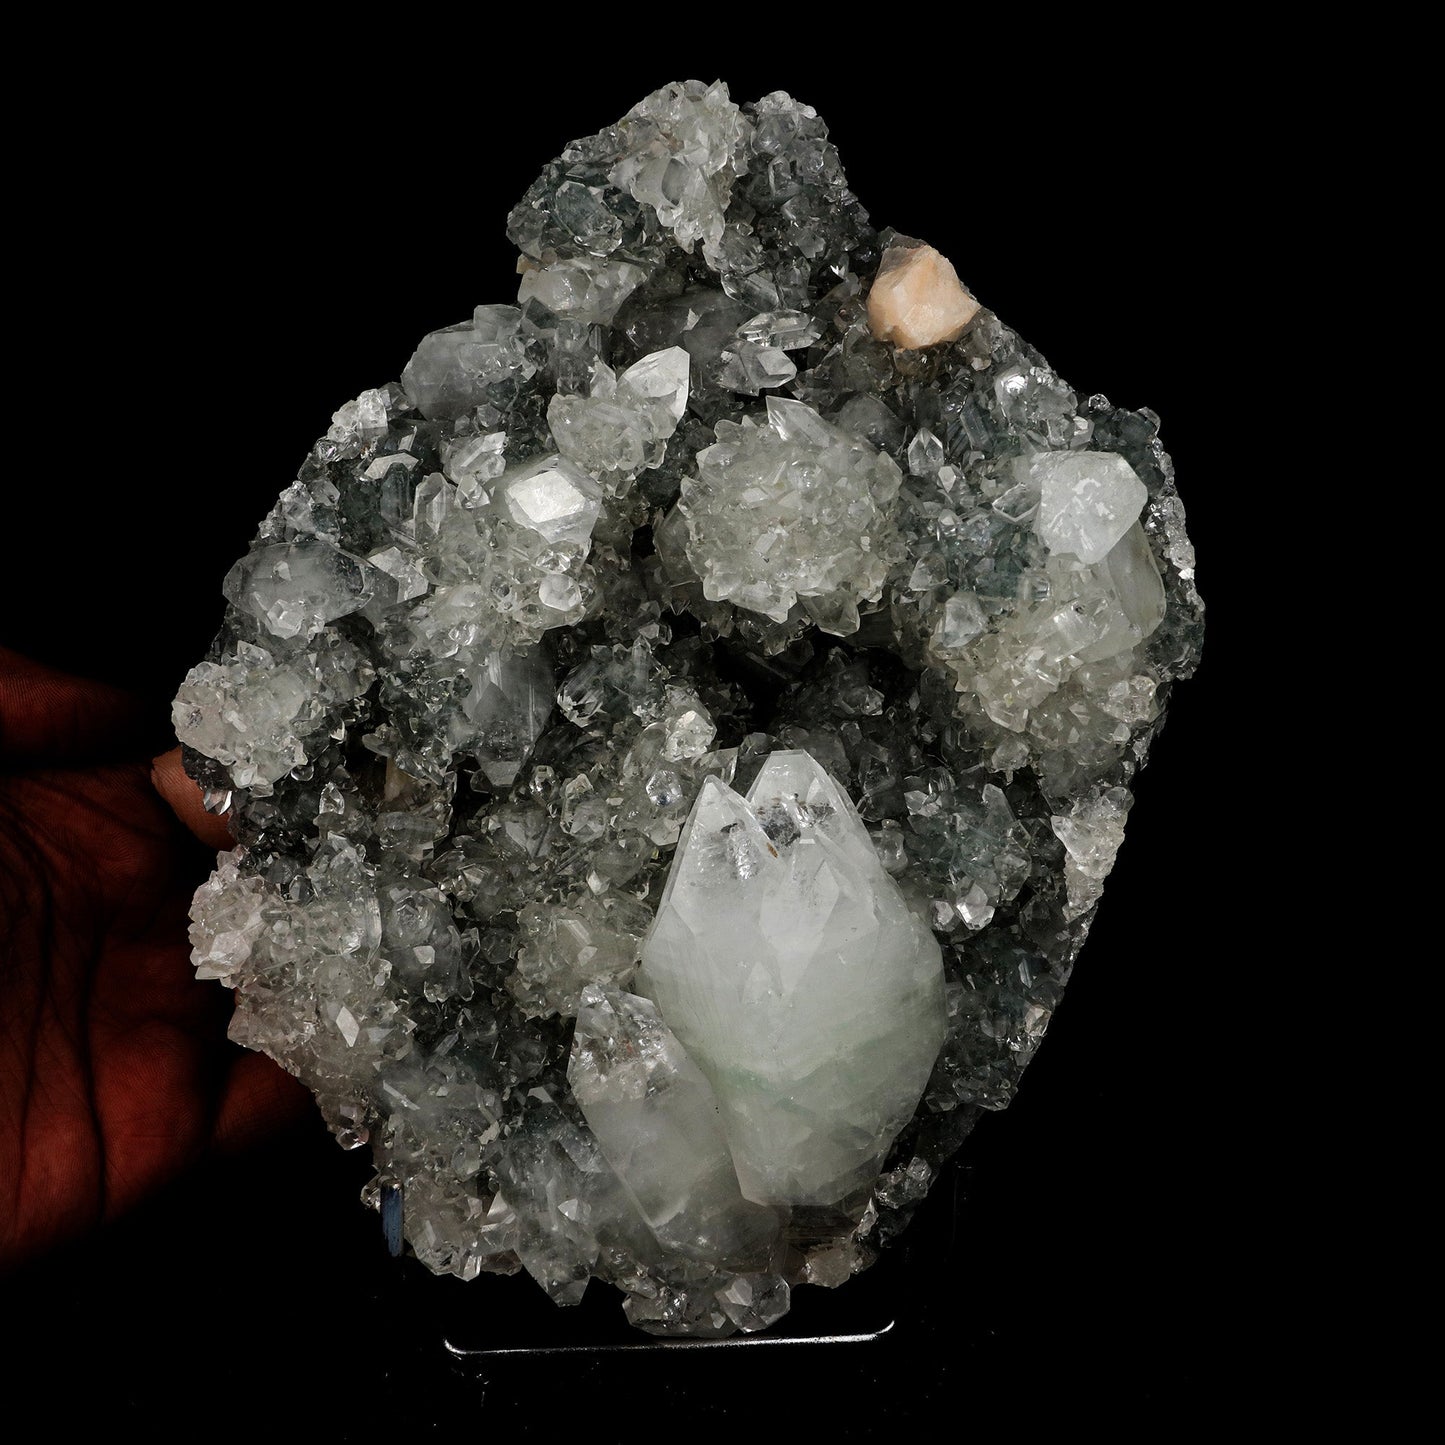 Pointed Apophyllite with Stilbite Big Cluster Natural Mineral Specimen…  https://www.superbminerals.us/products/pointed-apophyllite-with-stilbite-big-cluster-natural-mineral-specimen-b-5228  Features: A very large cluster of lustrous, water-clear Apopyllite crystals (up to 6.5 cm), many doubly terminated, hosting numerous smaller peach-colored Stilbite crystals. But what really sets this piece apart is the pristine, translucent, peach-colored bow-tie Stilbite crystal that rises from center 